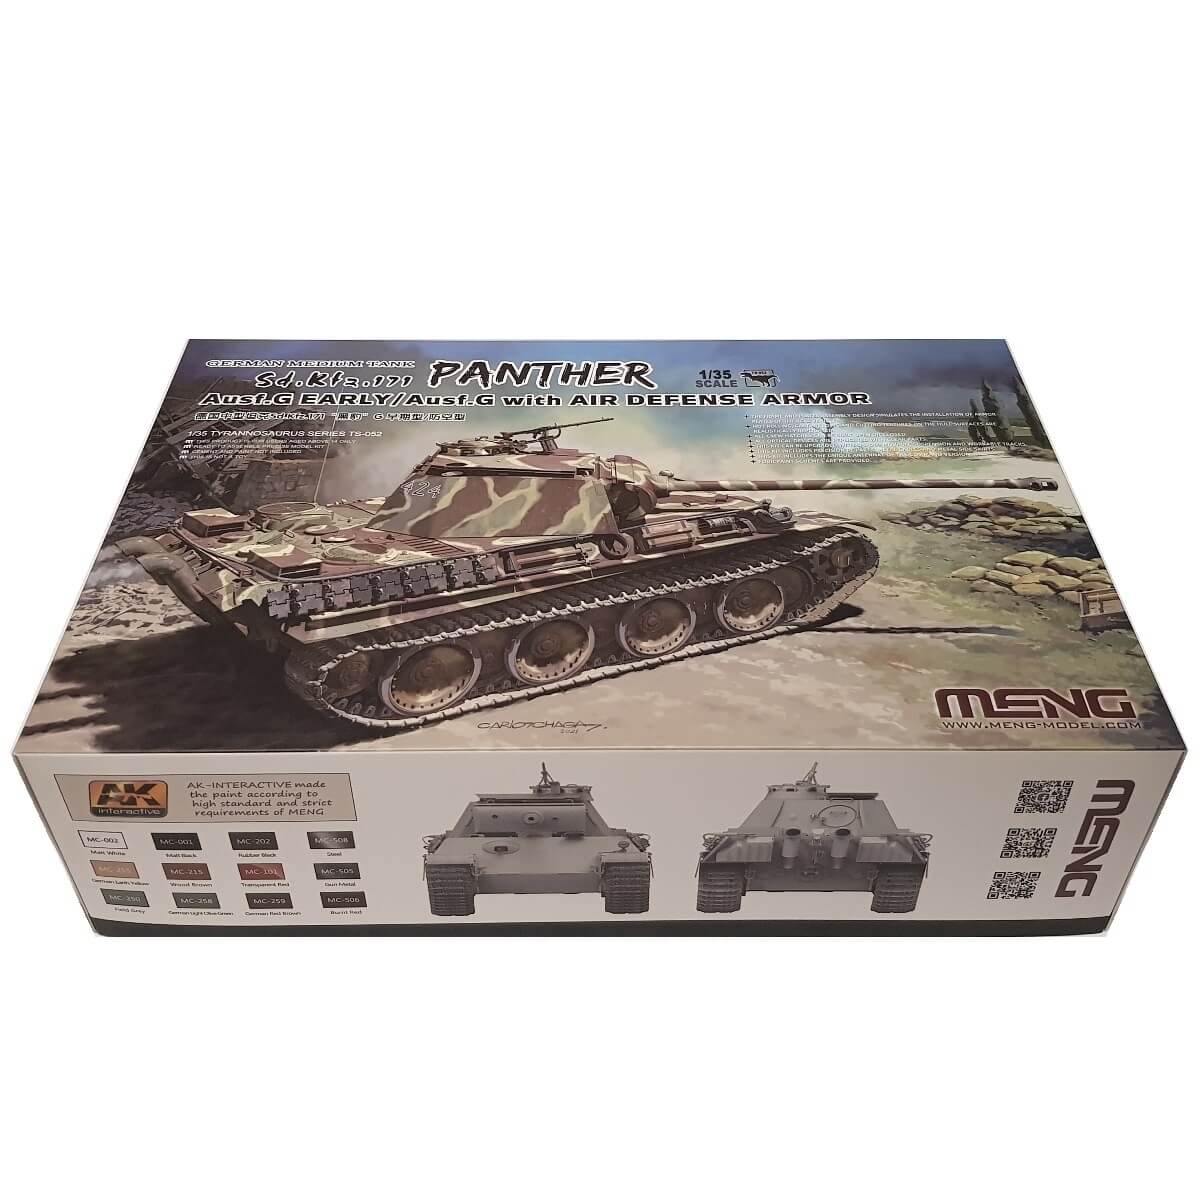 1:35 German Medium Tank Sd.Kfz. 171 PANTHER Ausf. G Early / Ausf. G with Air Defence Armor - MENG